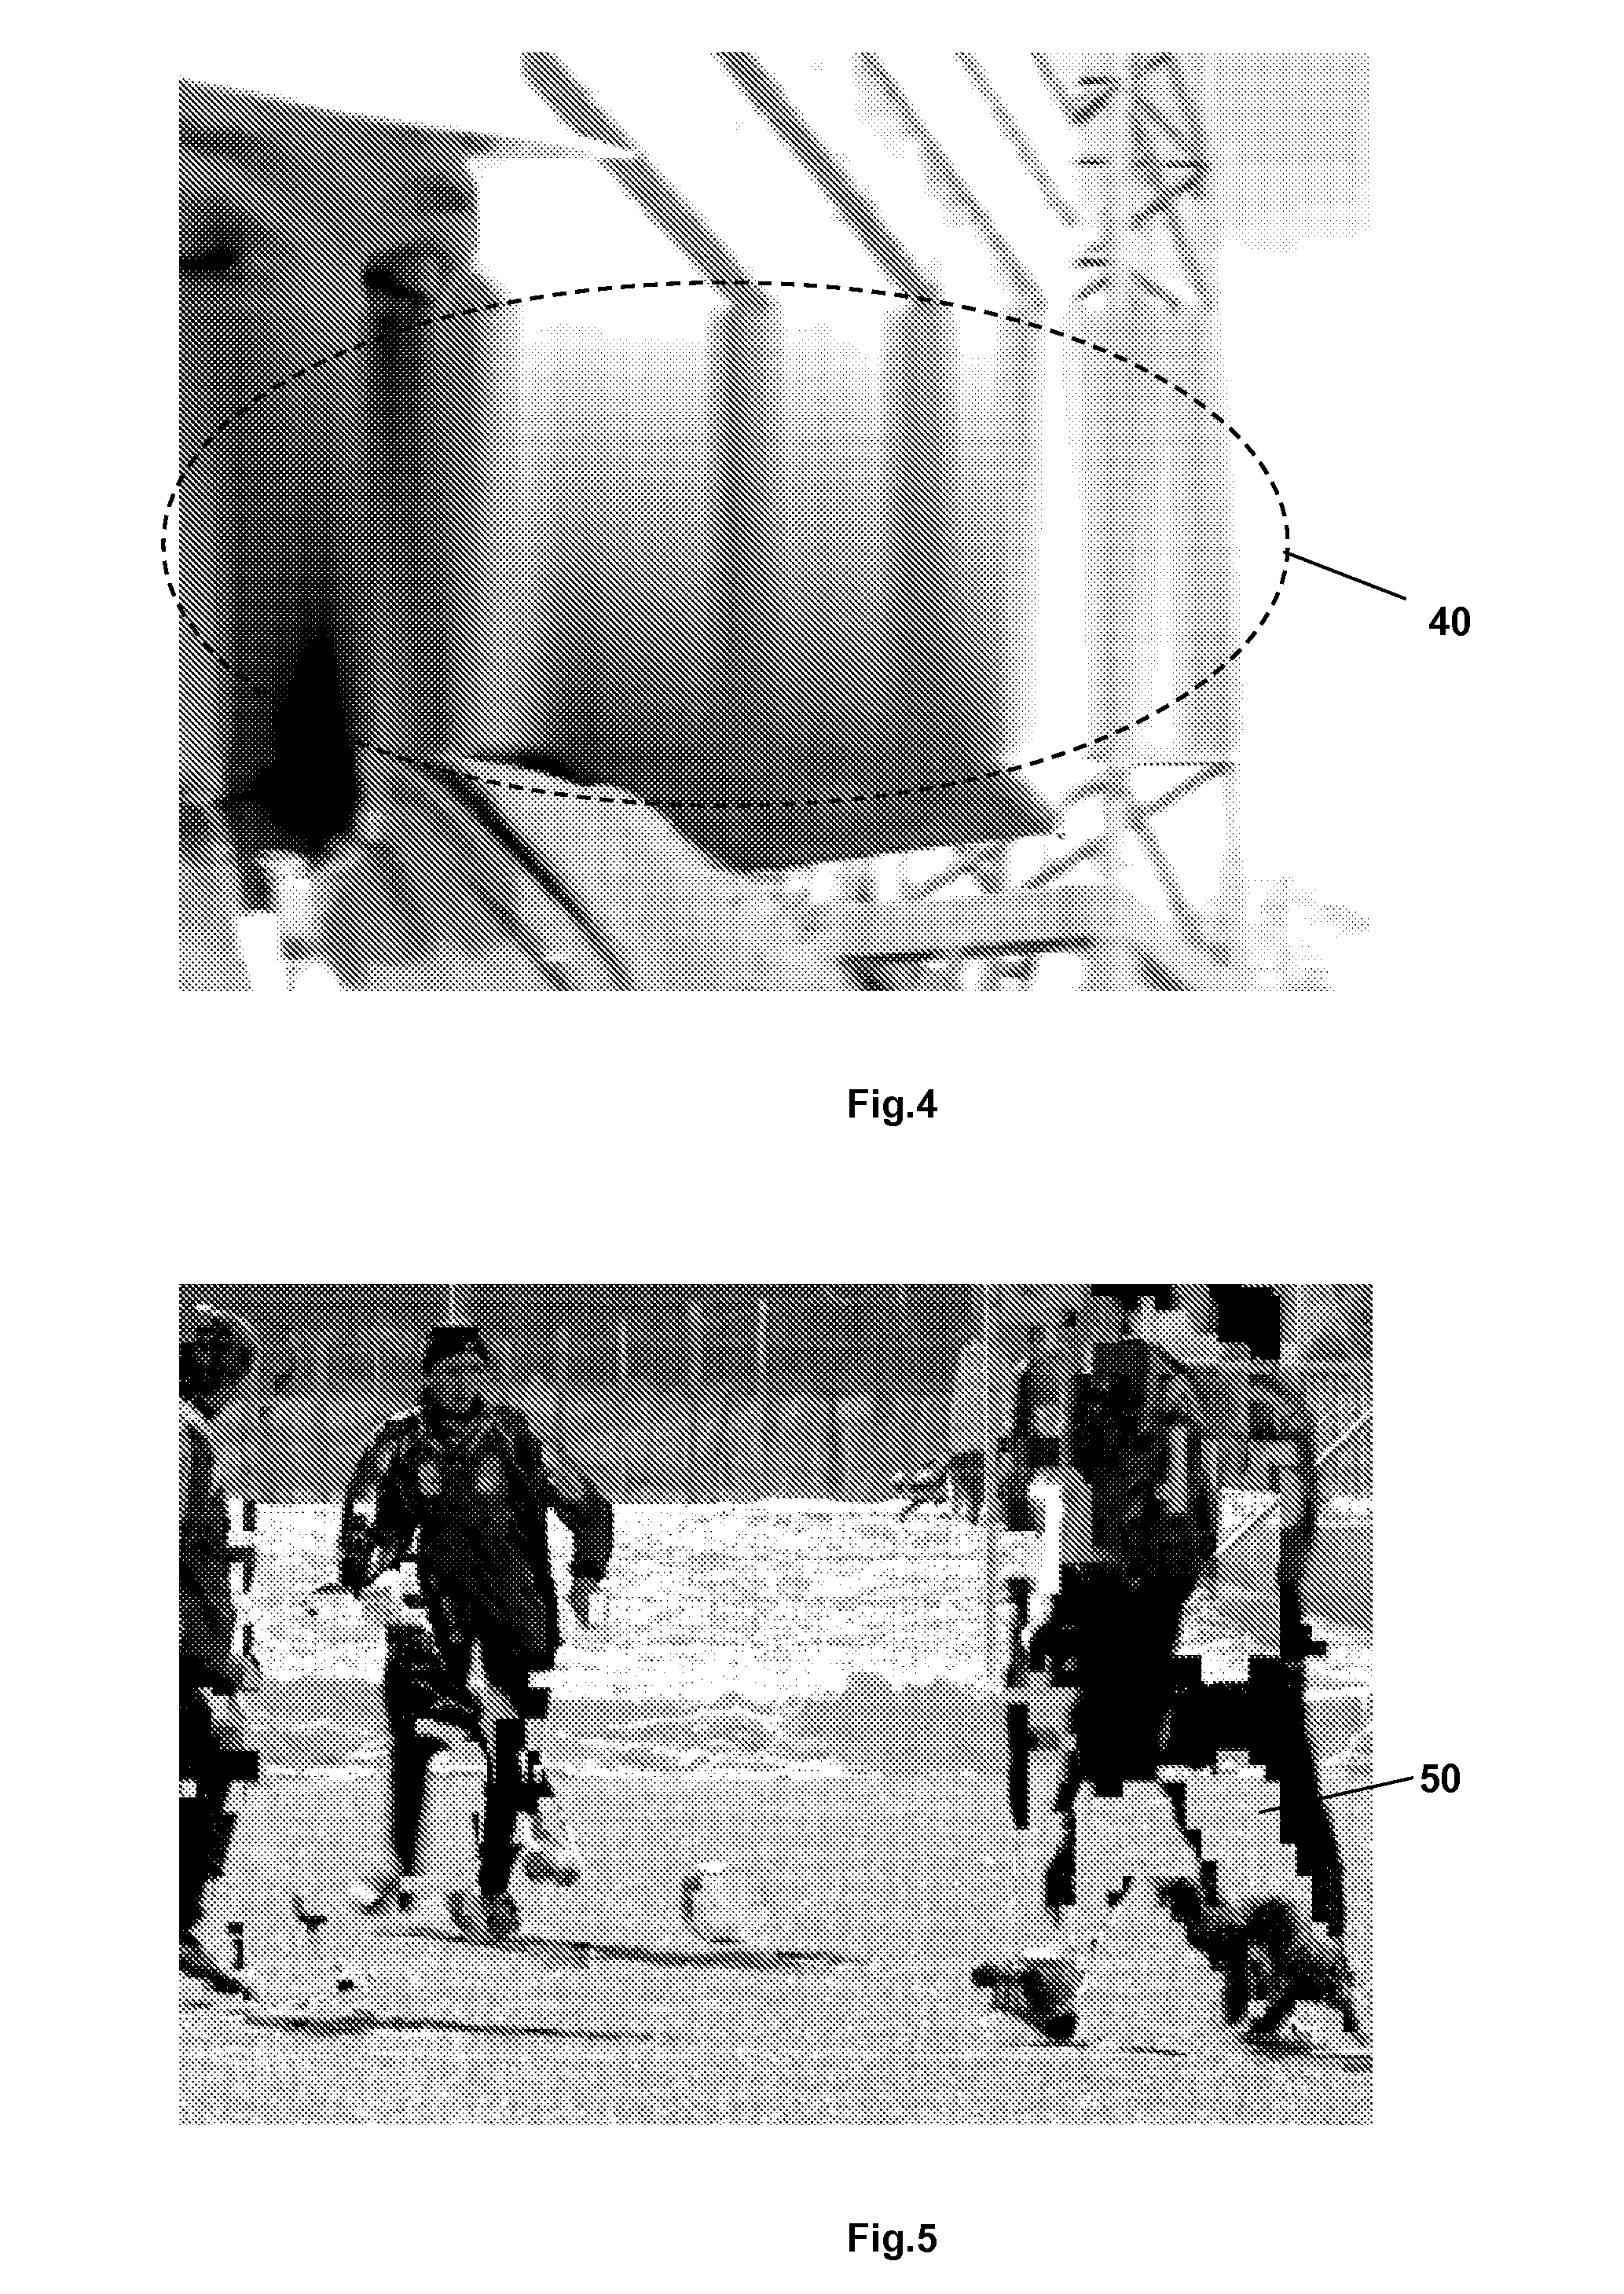 Method and device for calculating distortion of a video being affected by compression artifacts and channel artifacts